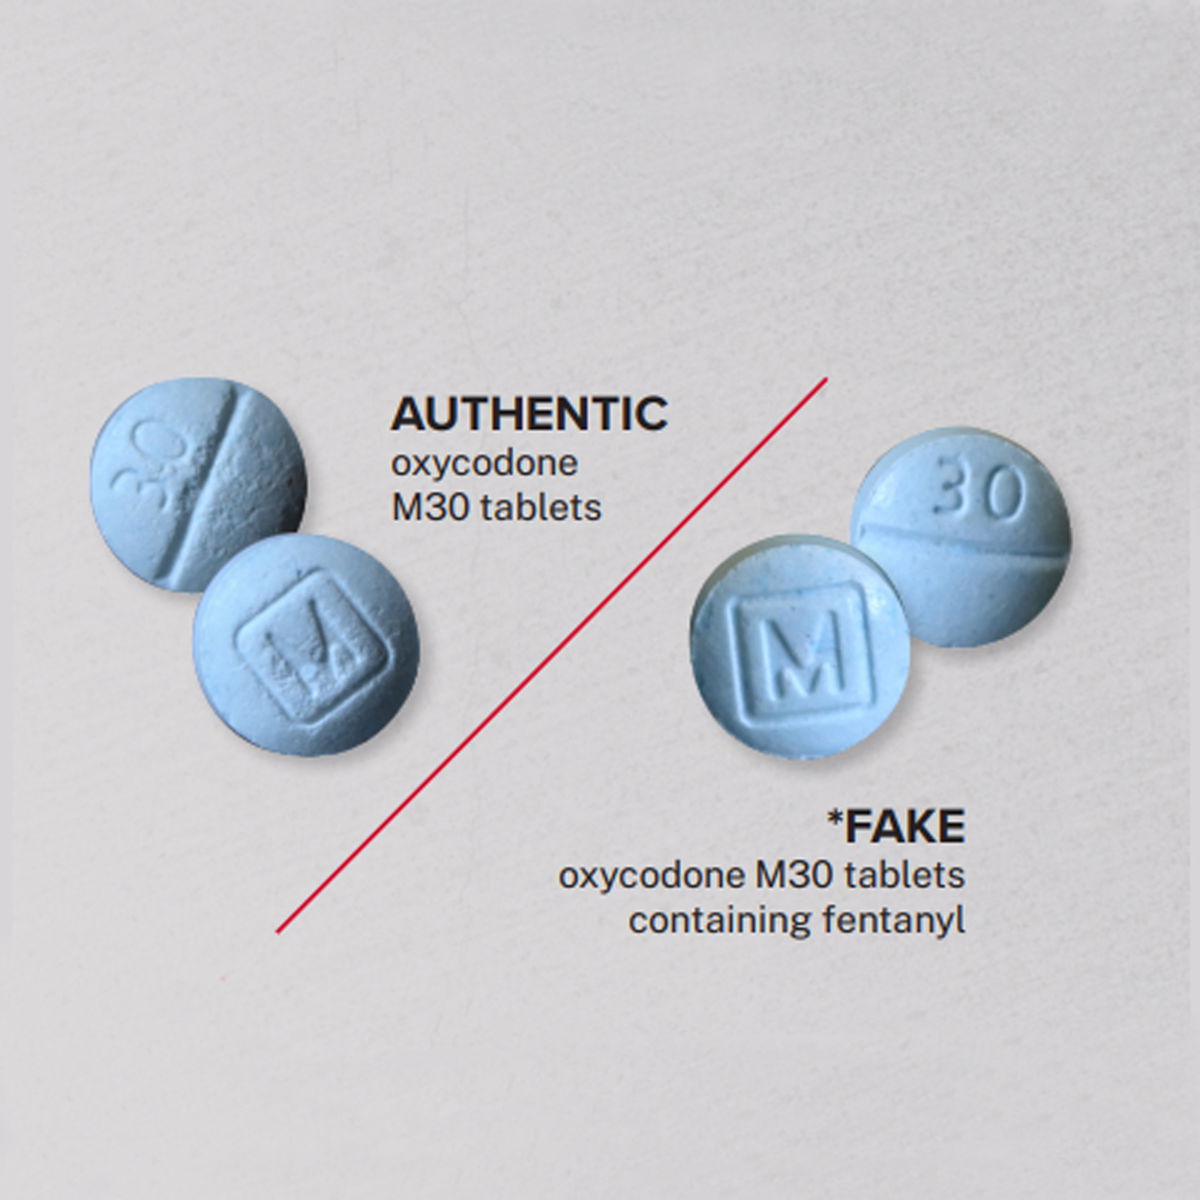 <i>United States Drug Enforcement Administration</i><br/>Fake pills are easy to purchase and are widely available